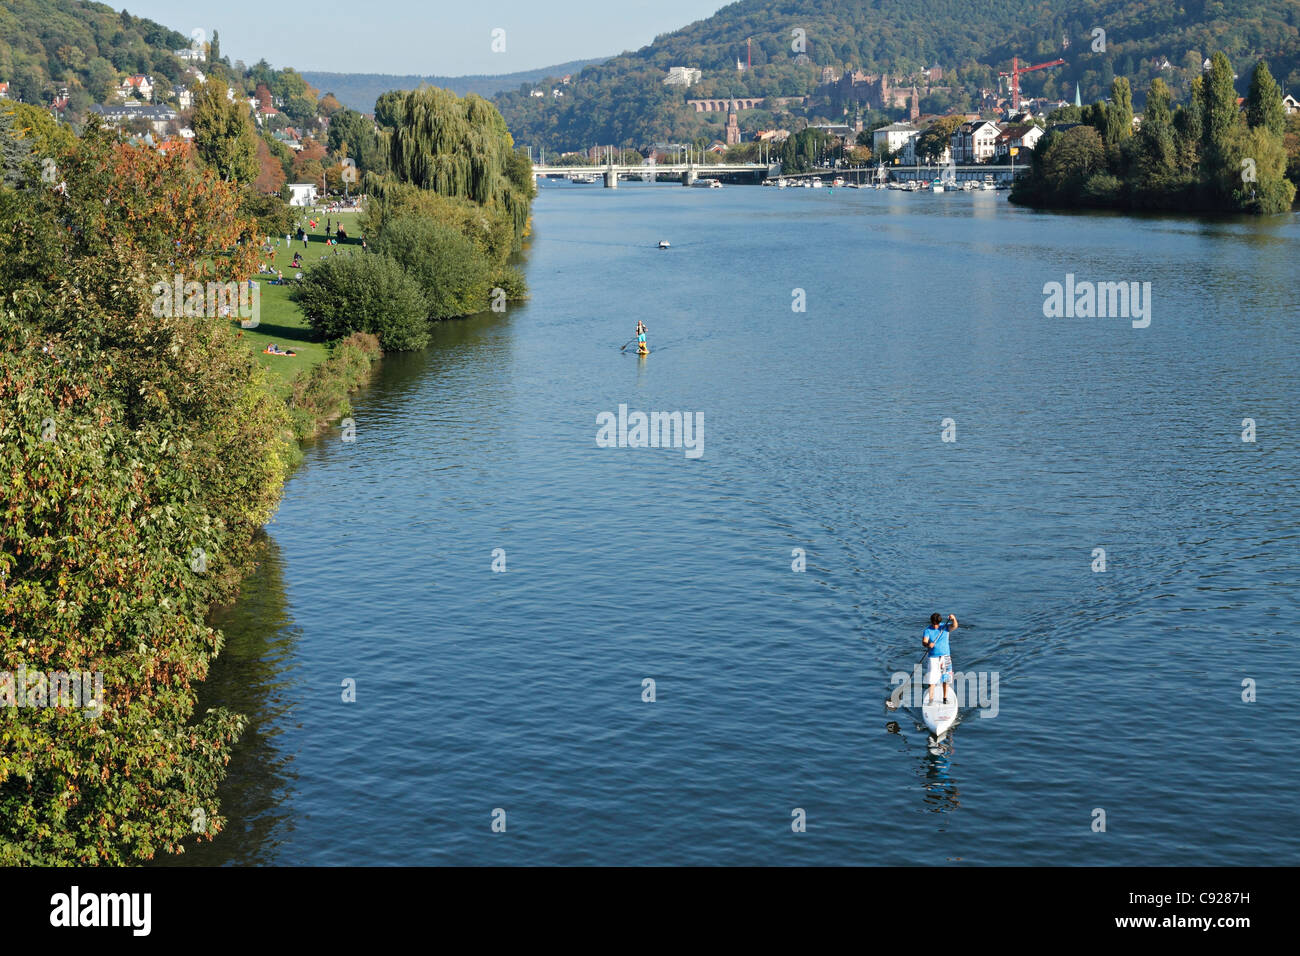 People standing on paddle boards at the Neckar River, Heidelberg Baden  Wurttemberg Germany Stock Photo - Alamy